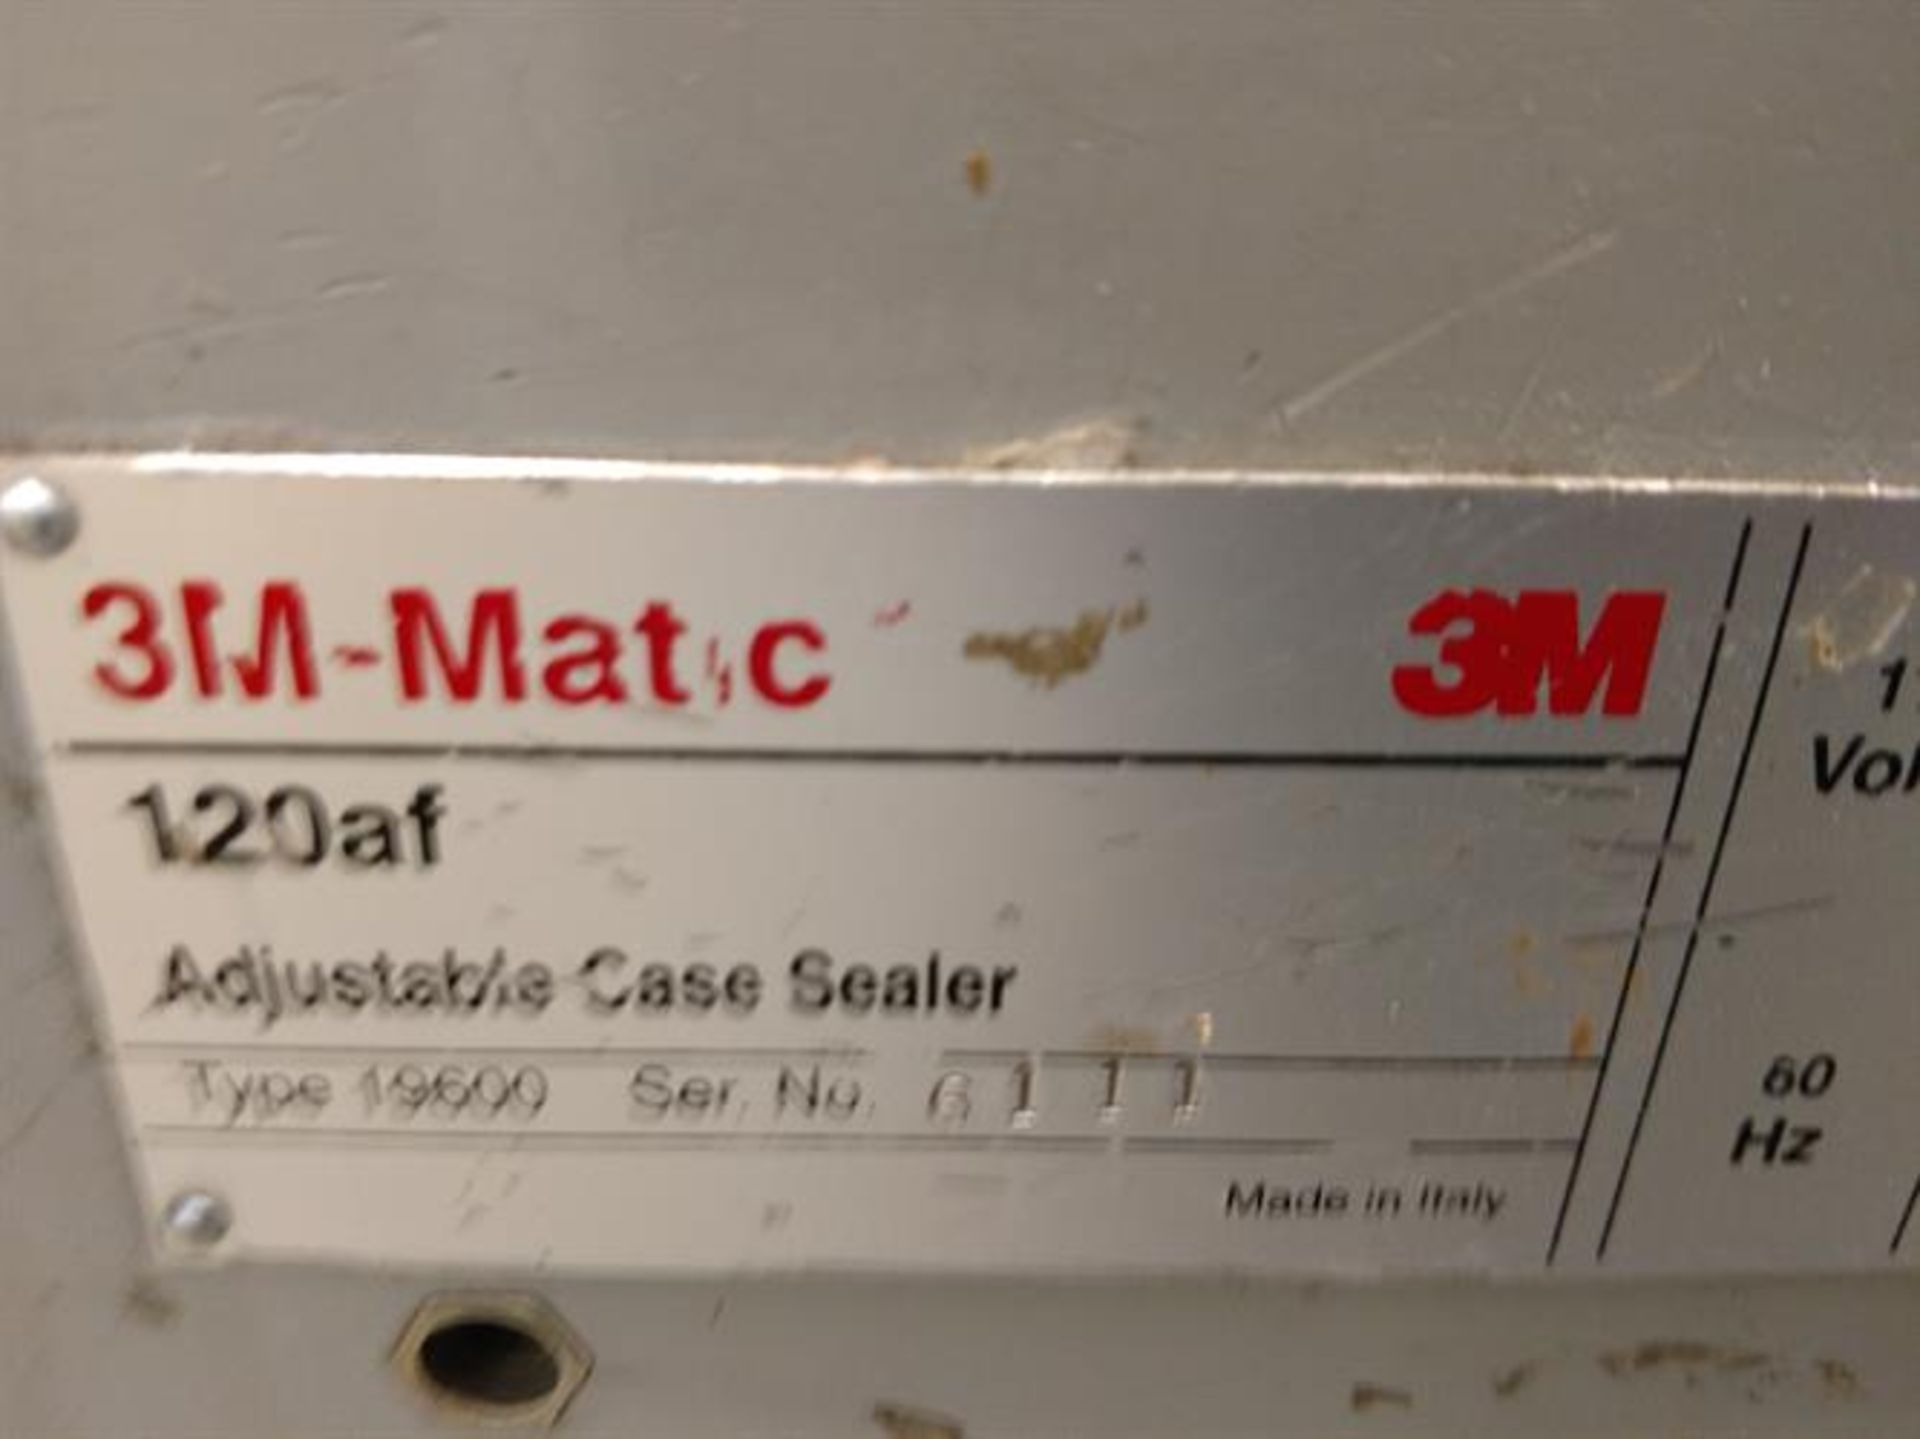 3M Matic Model 120AF Top and Bottom Case Taper - Top and bottom heads - 2" tape - Side pull - Image 3 of 3